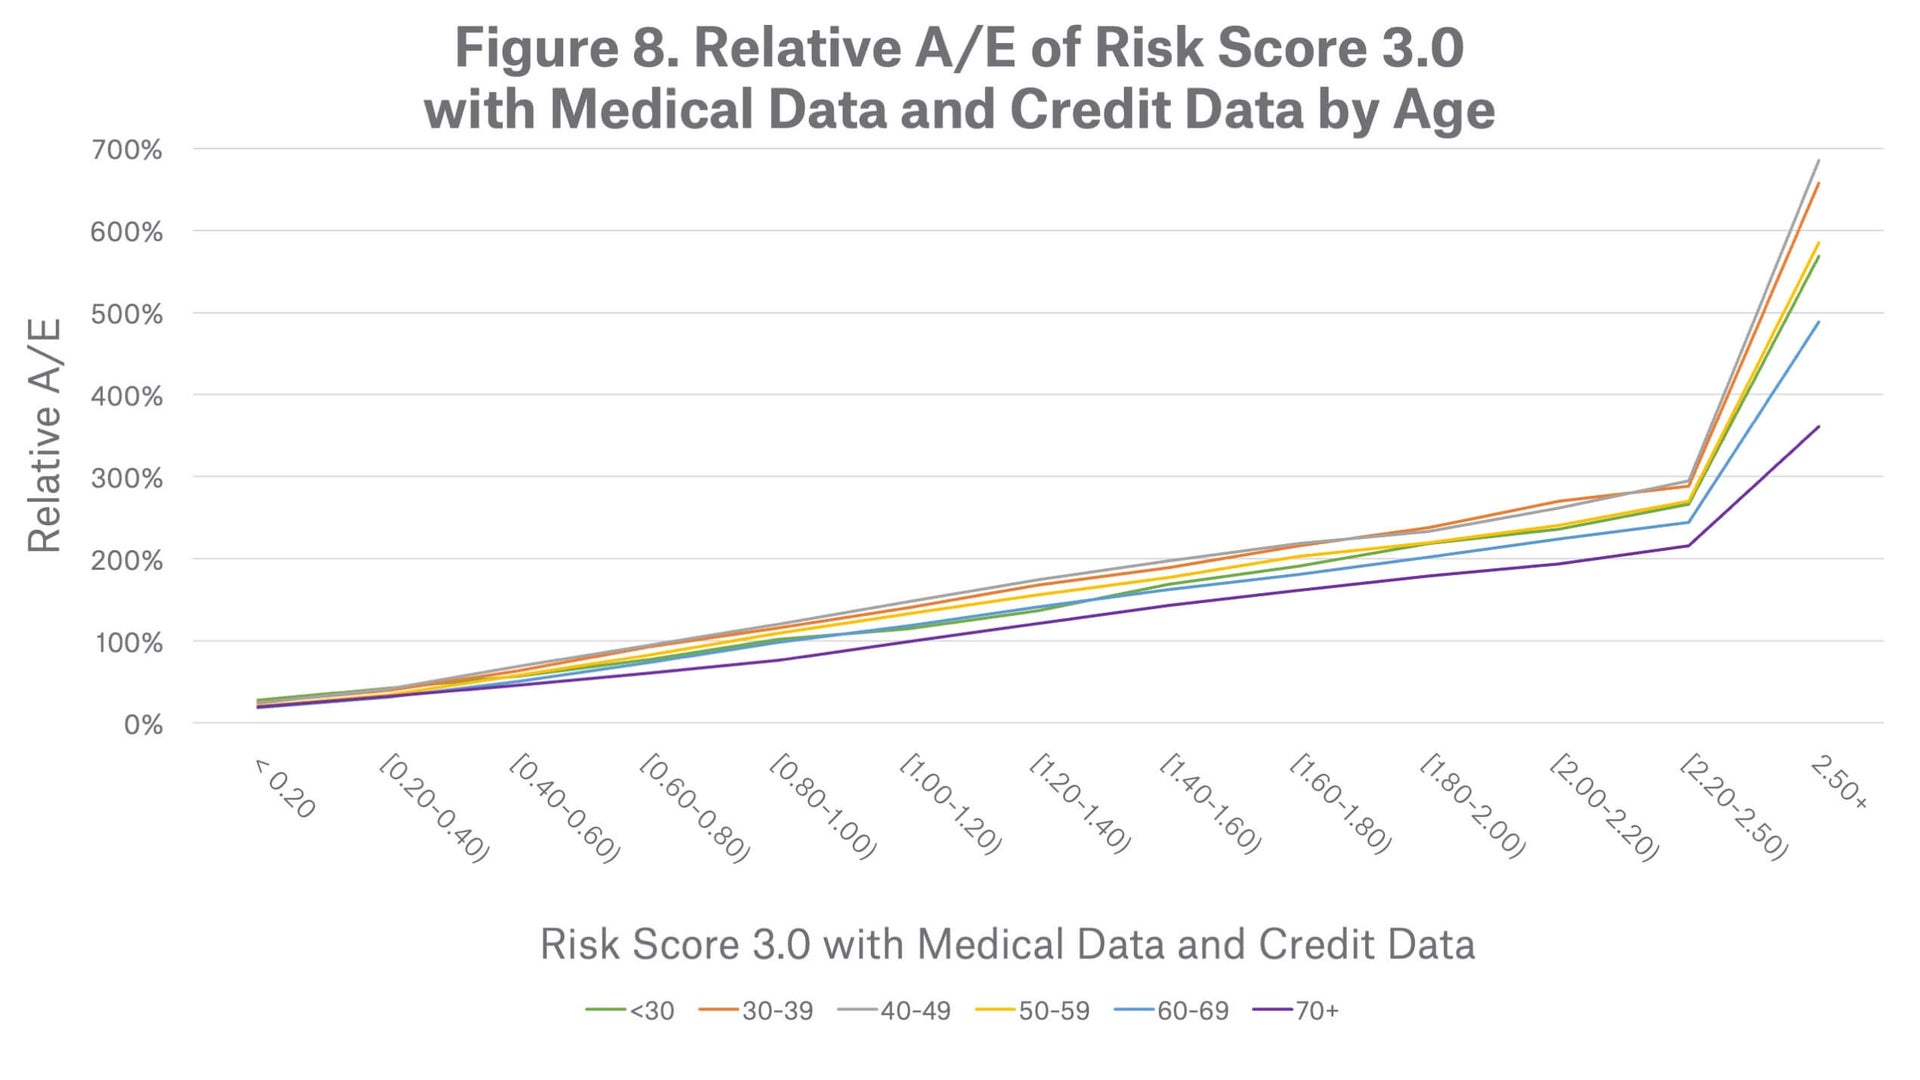 Figure-8.-Relative-A_E-of-Risk-Score-3.0-with-Medical-and-Credit-Data-by-Age.jpg